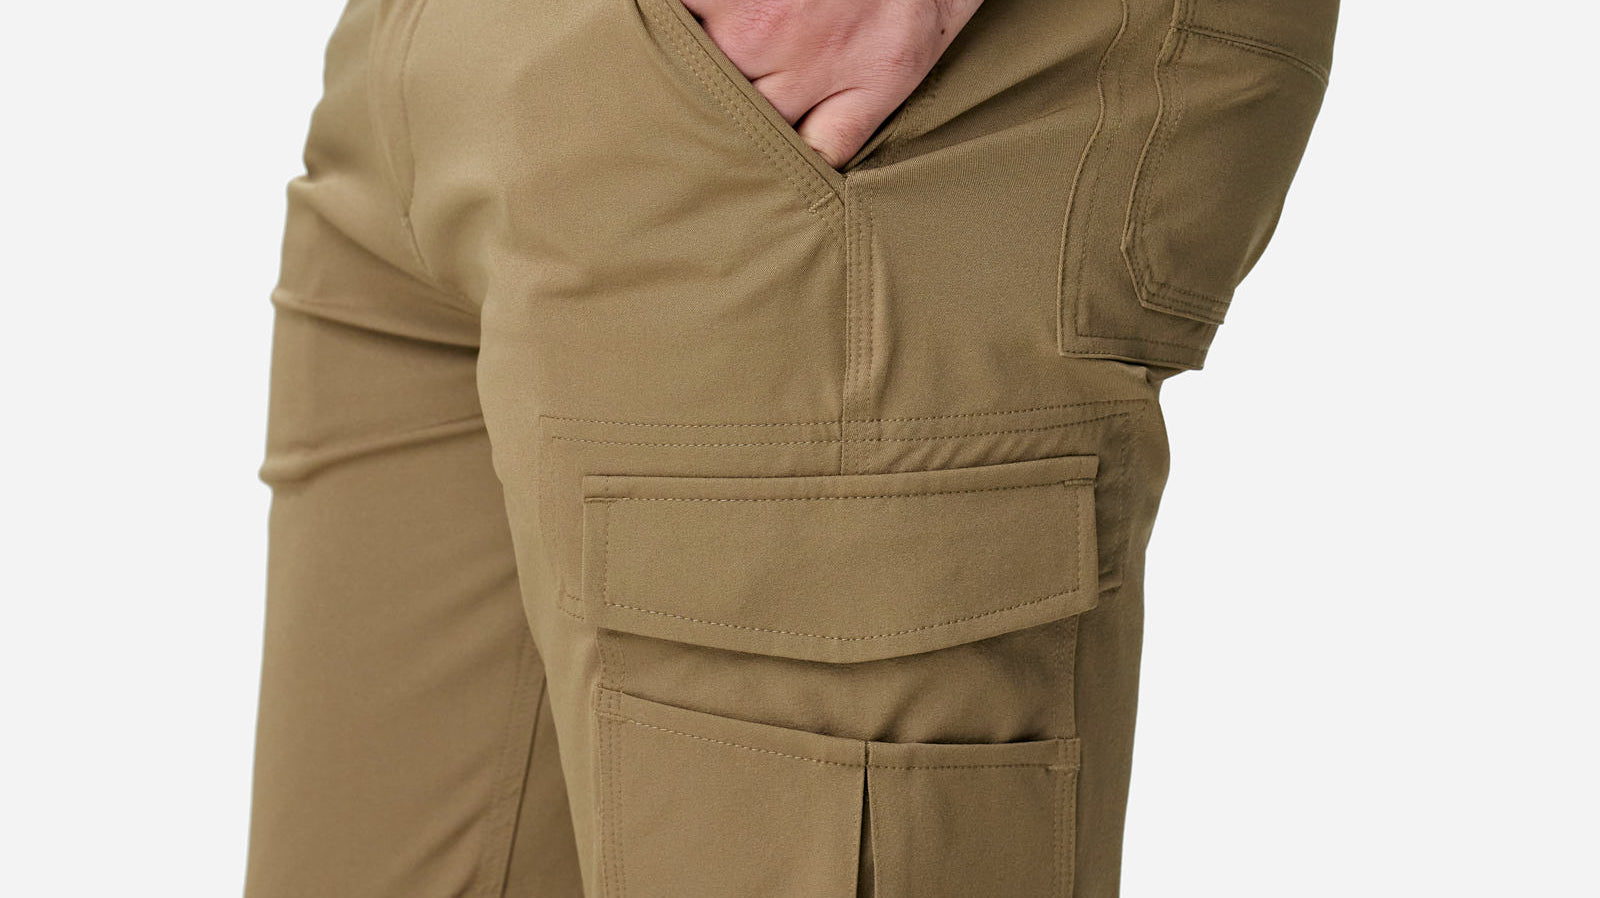 Introducing the ELWD Light Pant: Redefining Comfort and Functionality